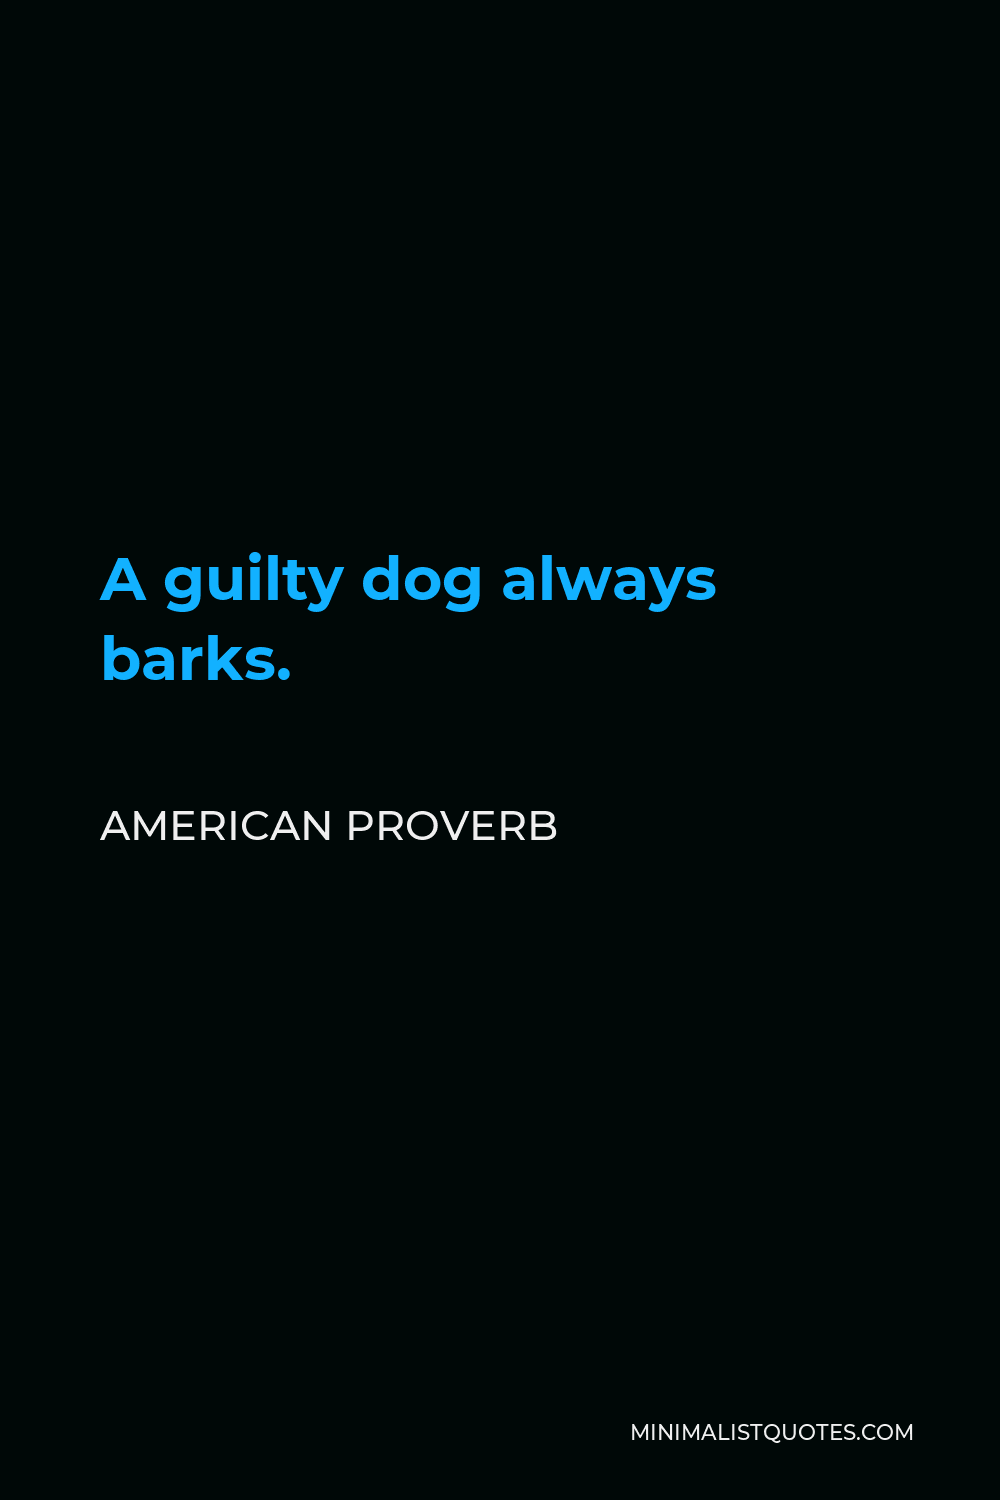 American Proverb Quote - A guilty dog always barks.